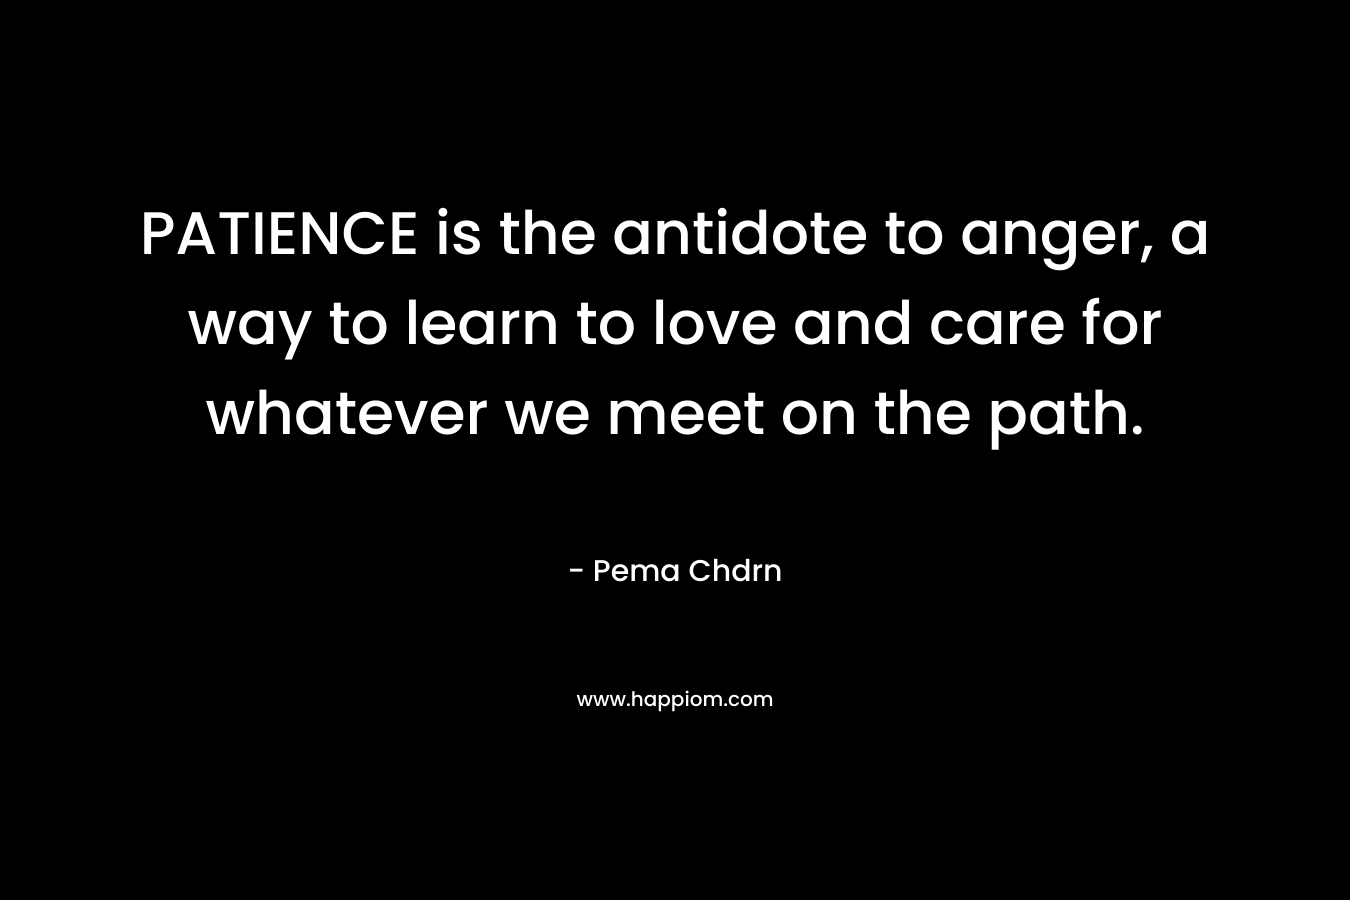 PATIENCE is the antidote to anger, a way to learn to love and care for whatever we meet on the path. – Pema Chdrn